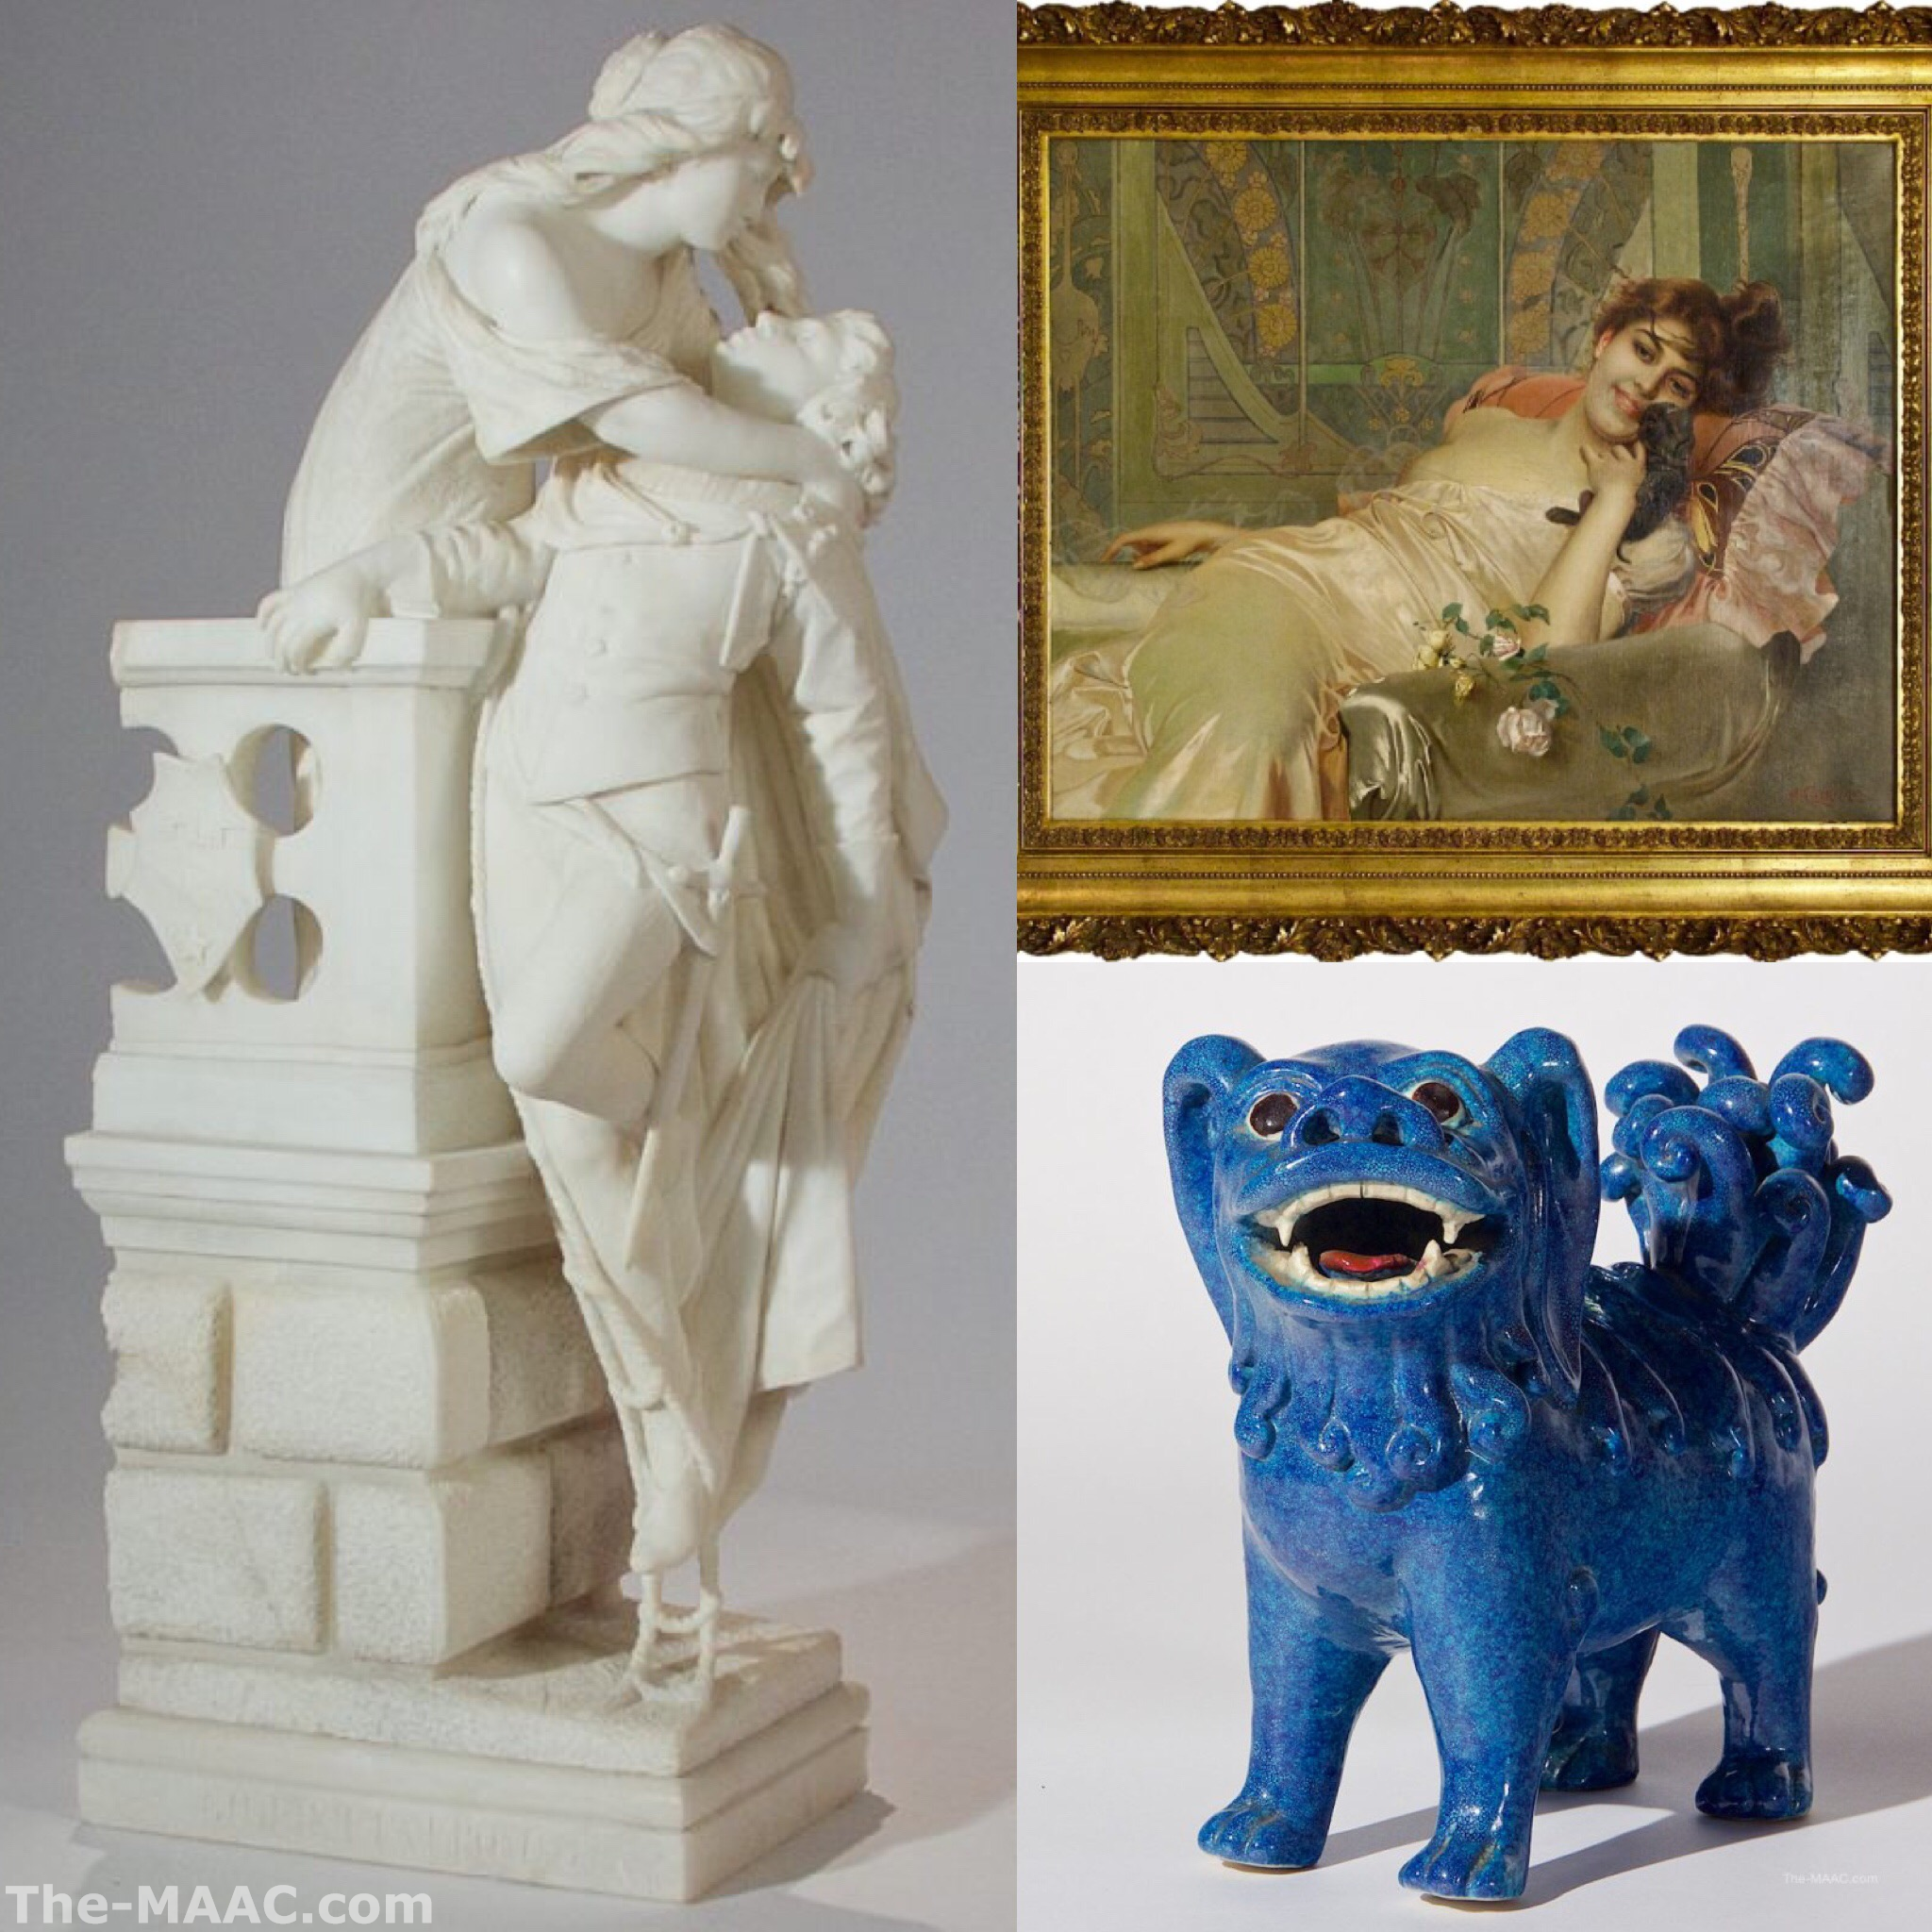 Manhattan Art & Antiques Center - Items added to catalog in 2016